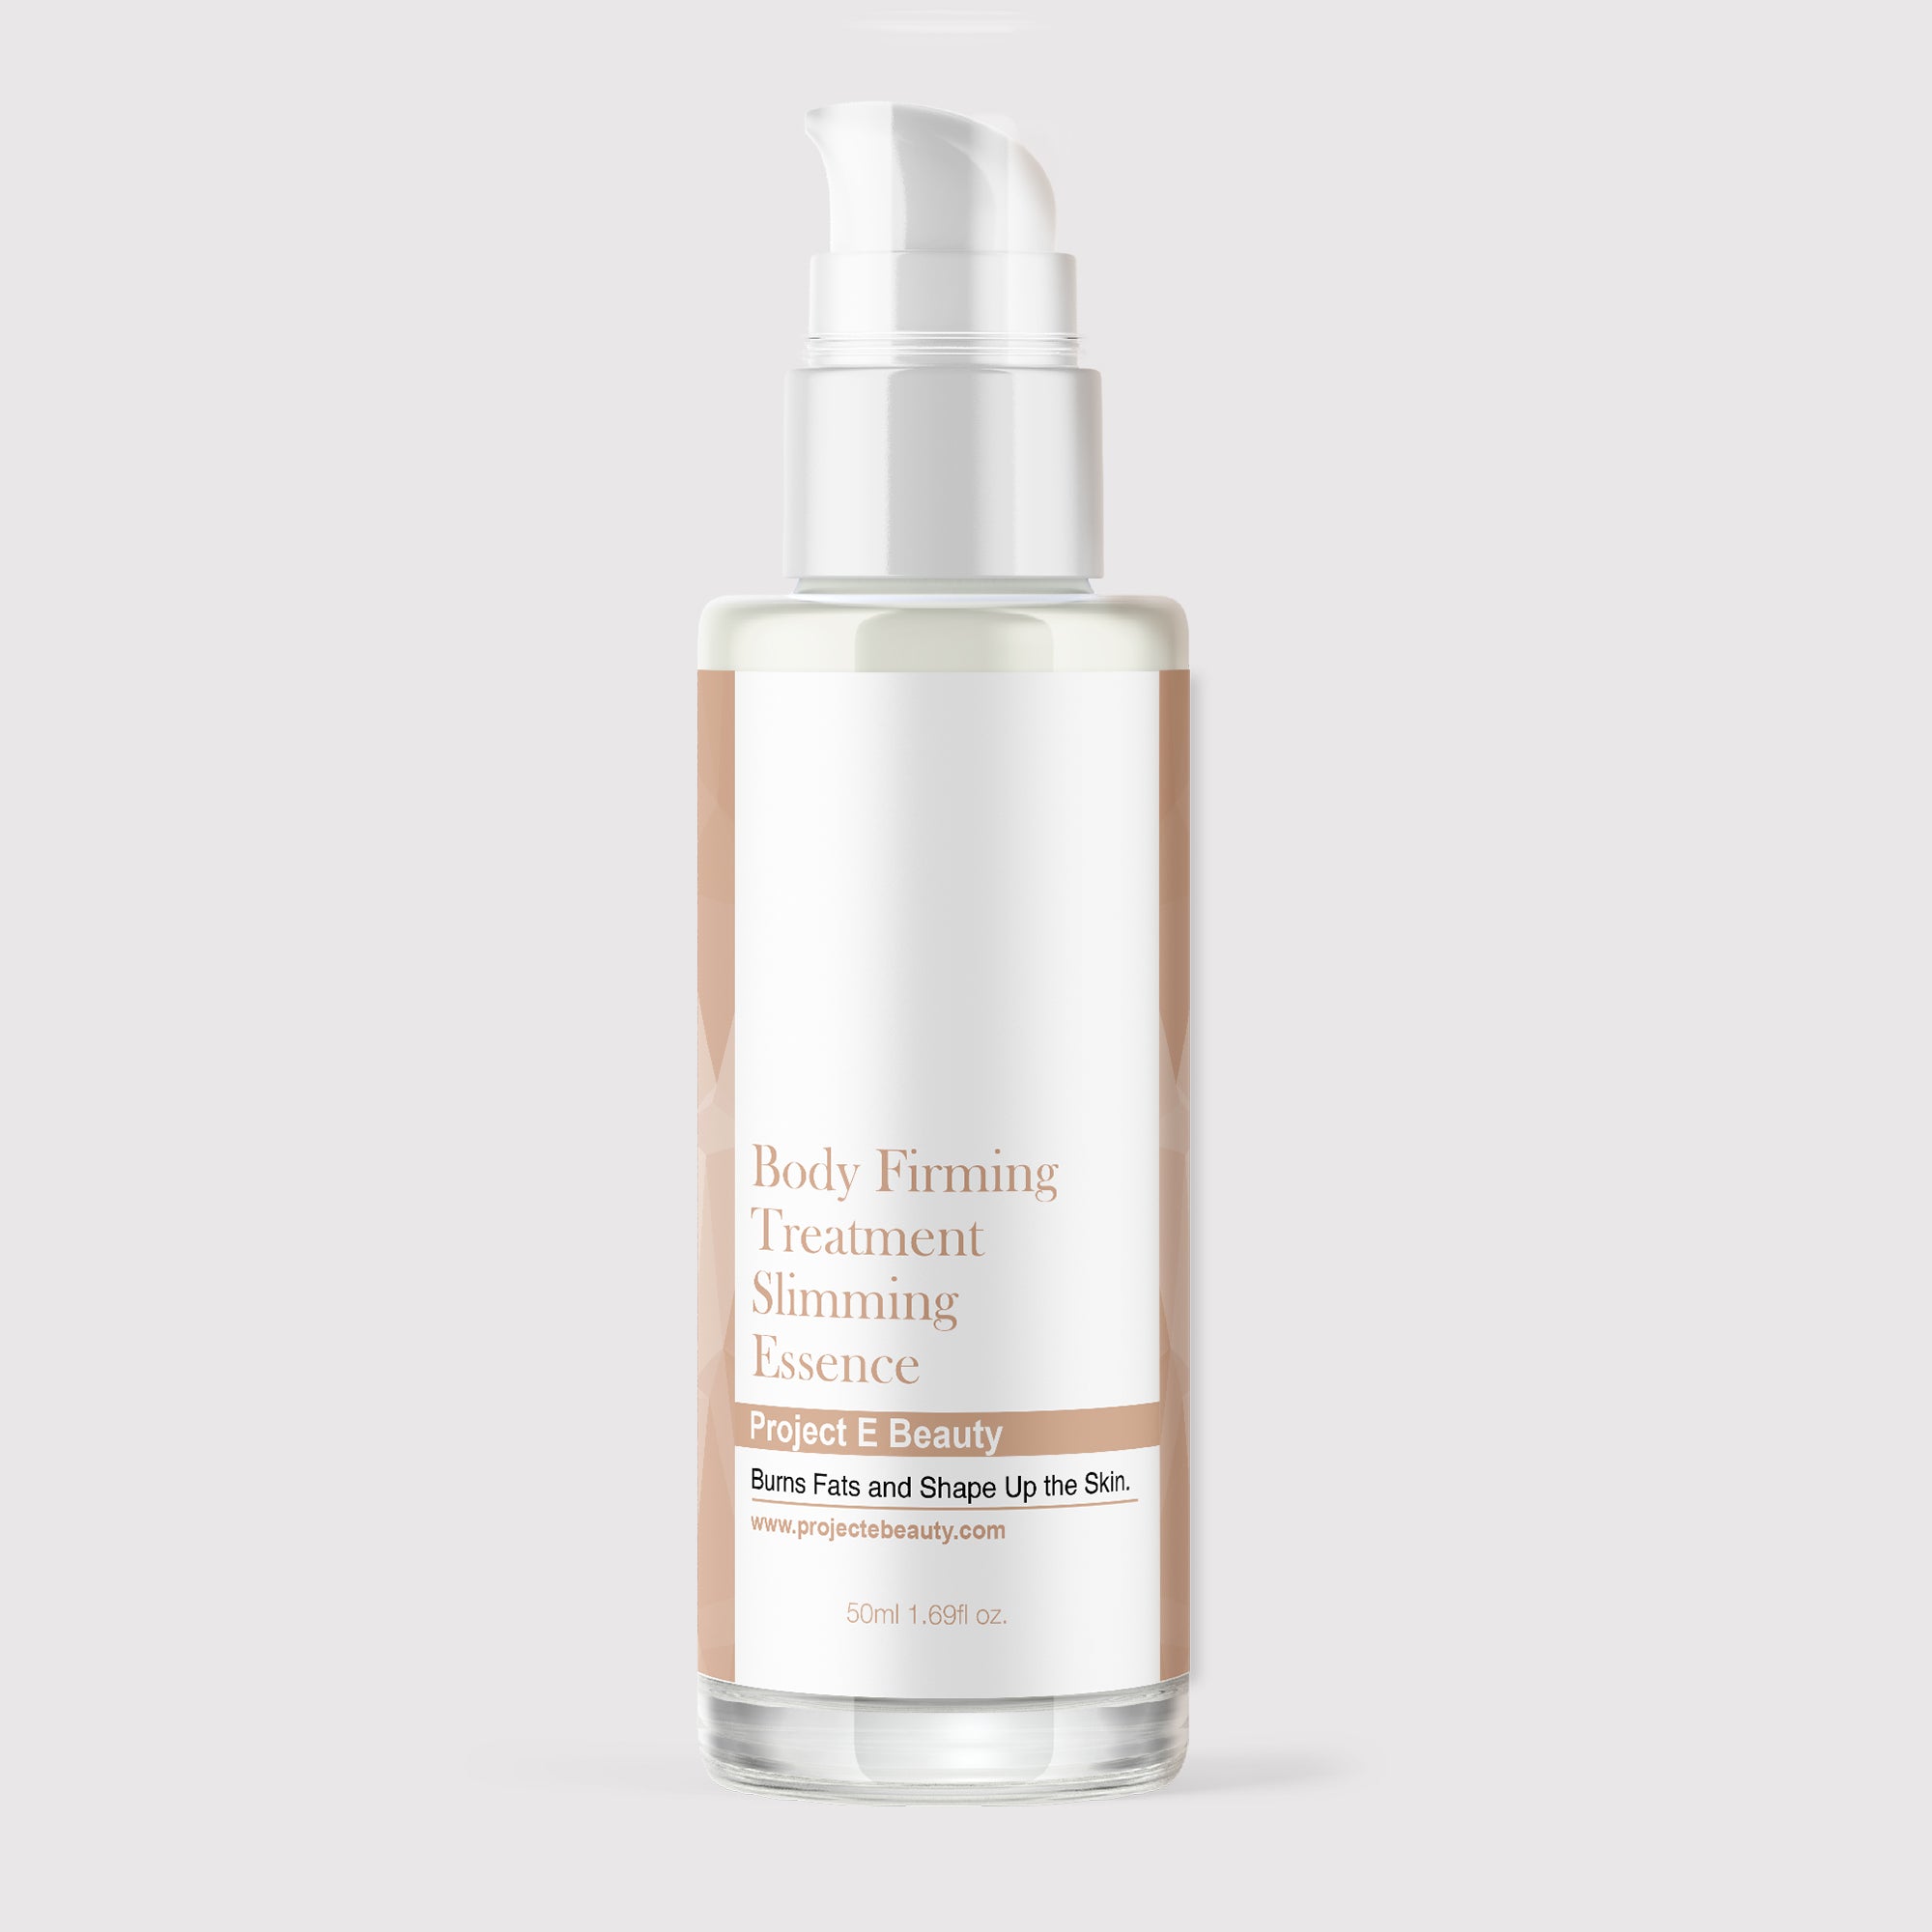 Project E Beauty Body Firming Treatment Slimming Essence